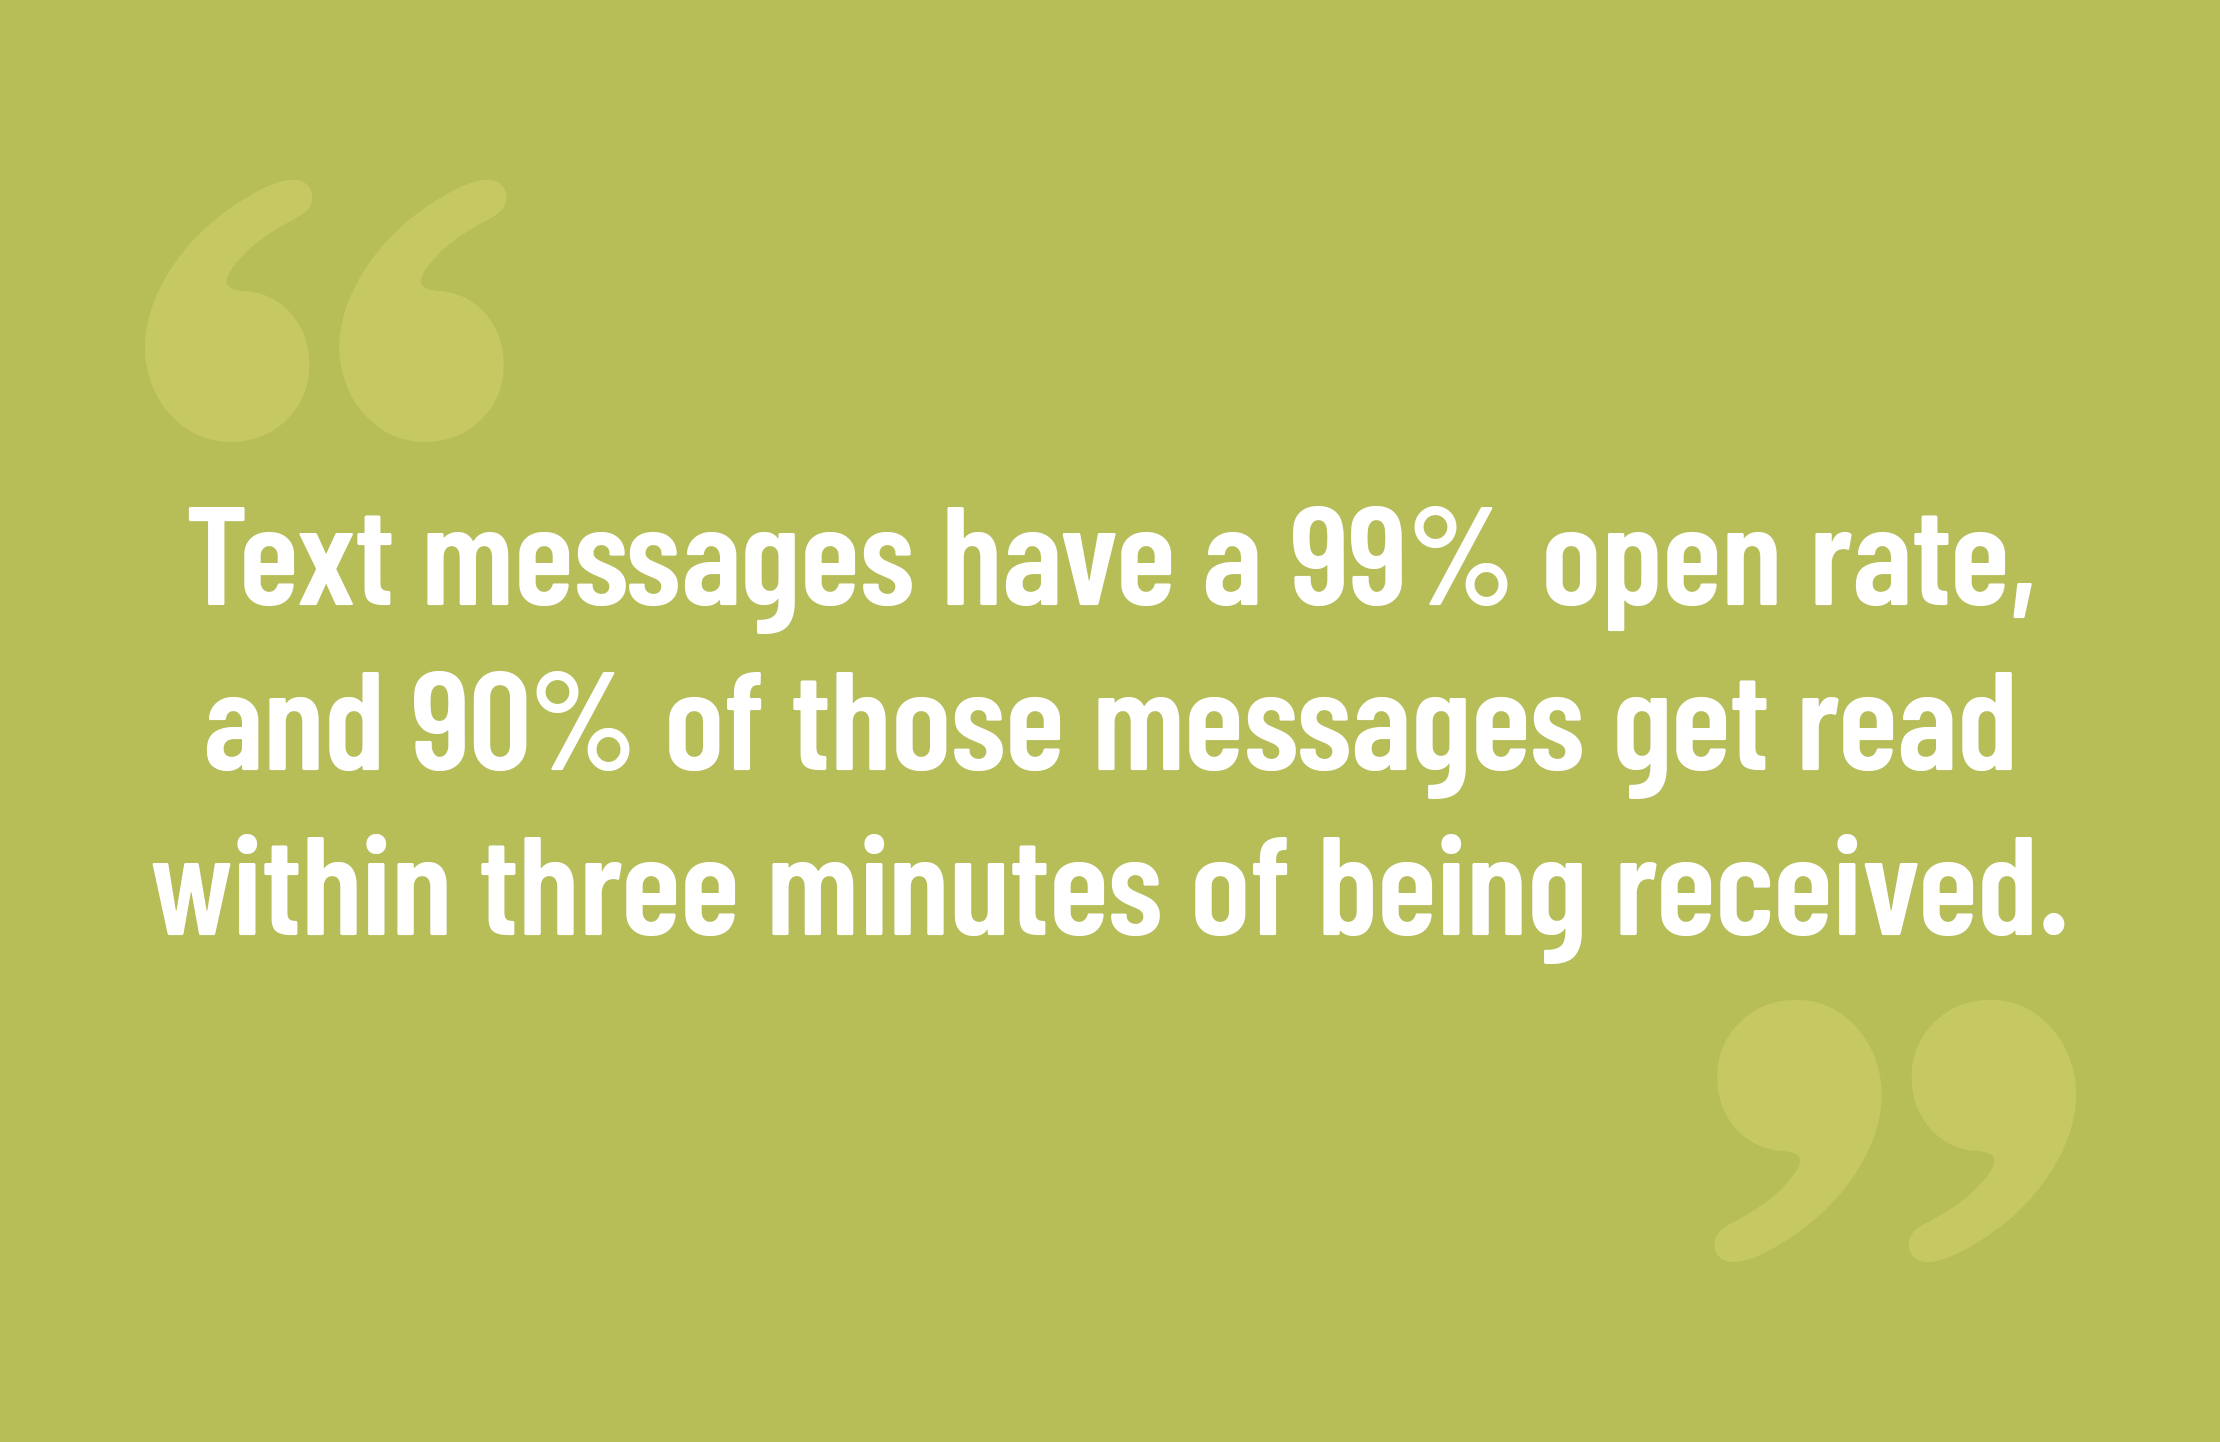 Top 5 Benefits of Nonprofit SMS Marketing